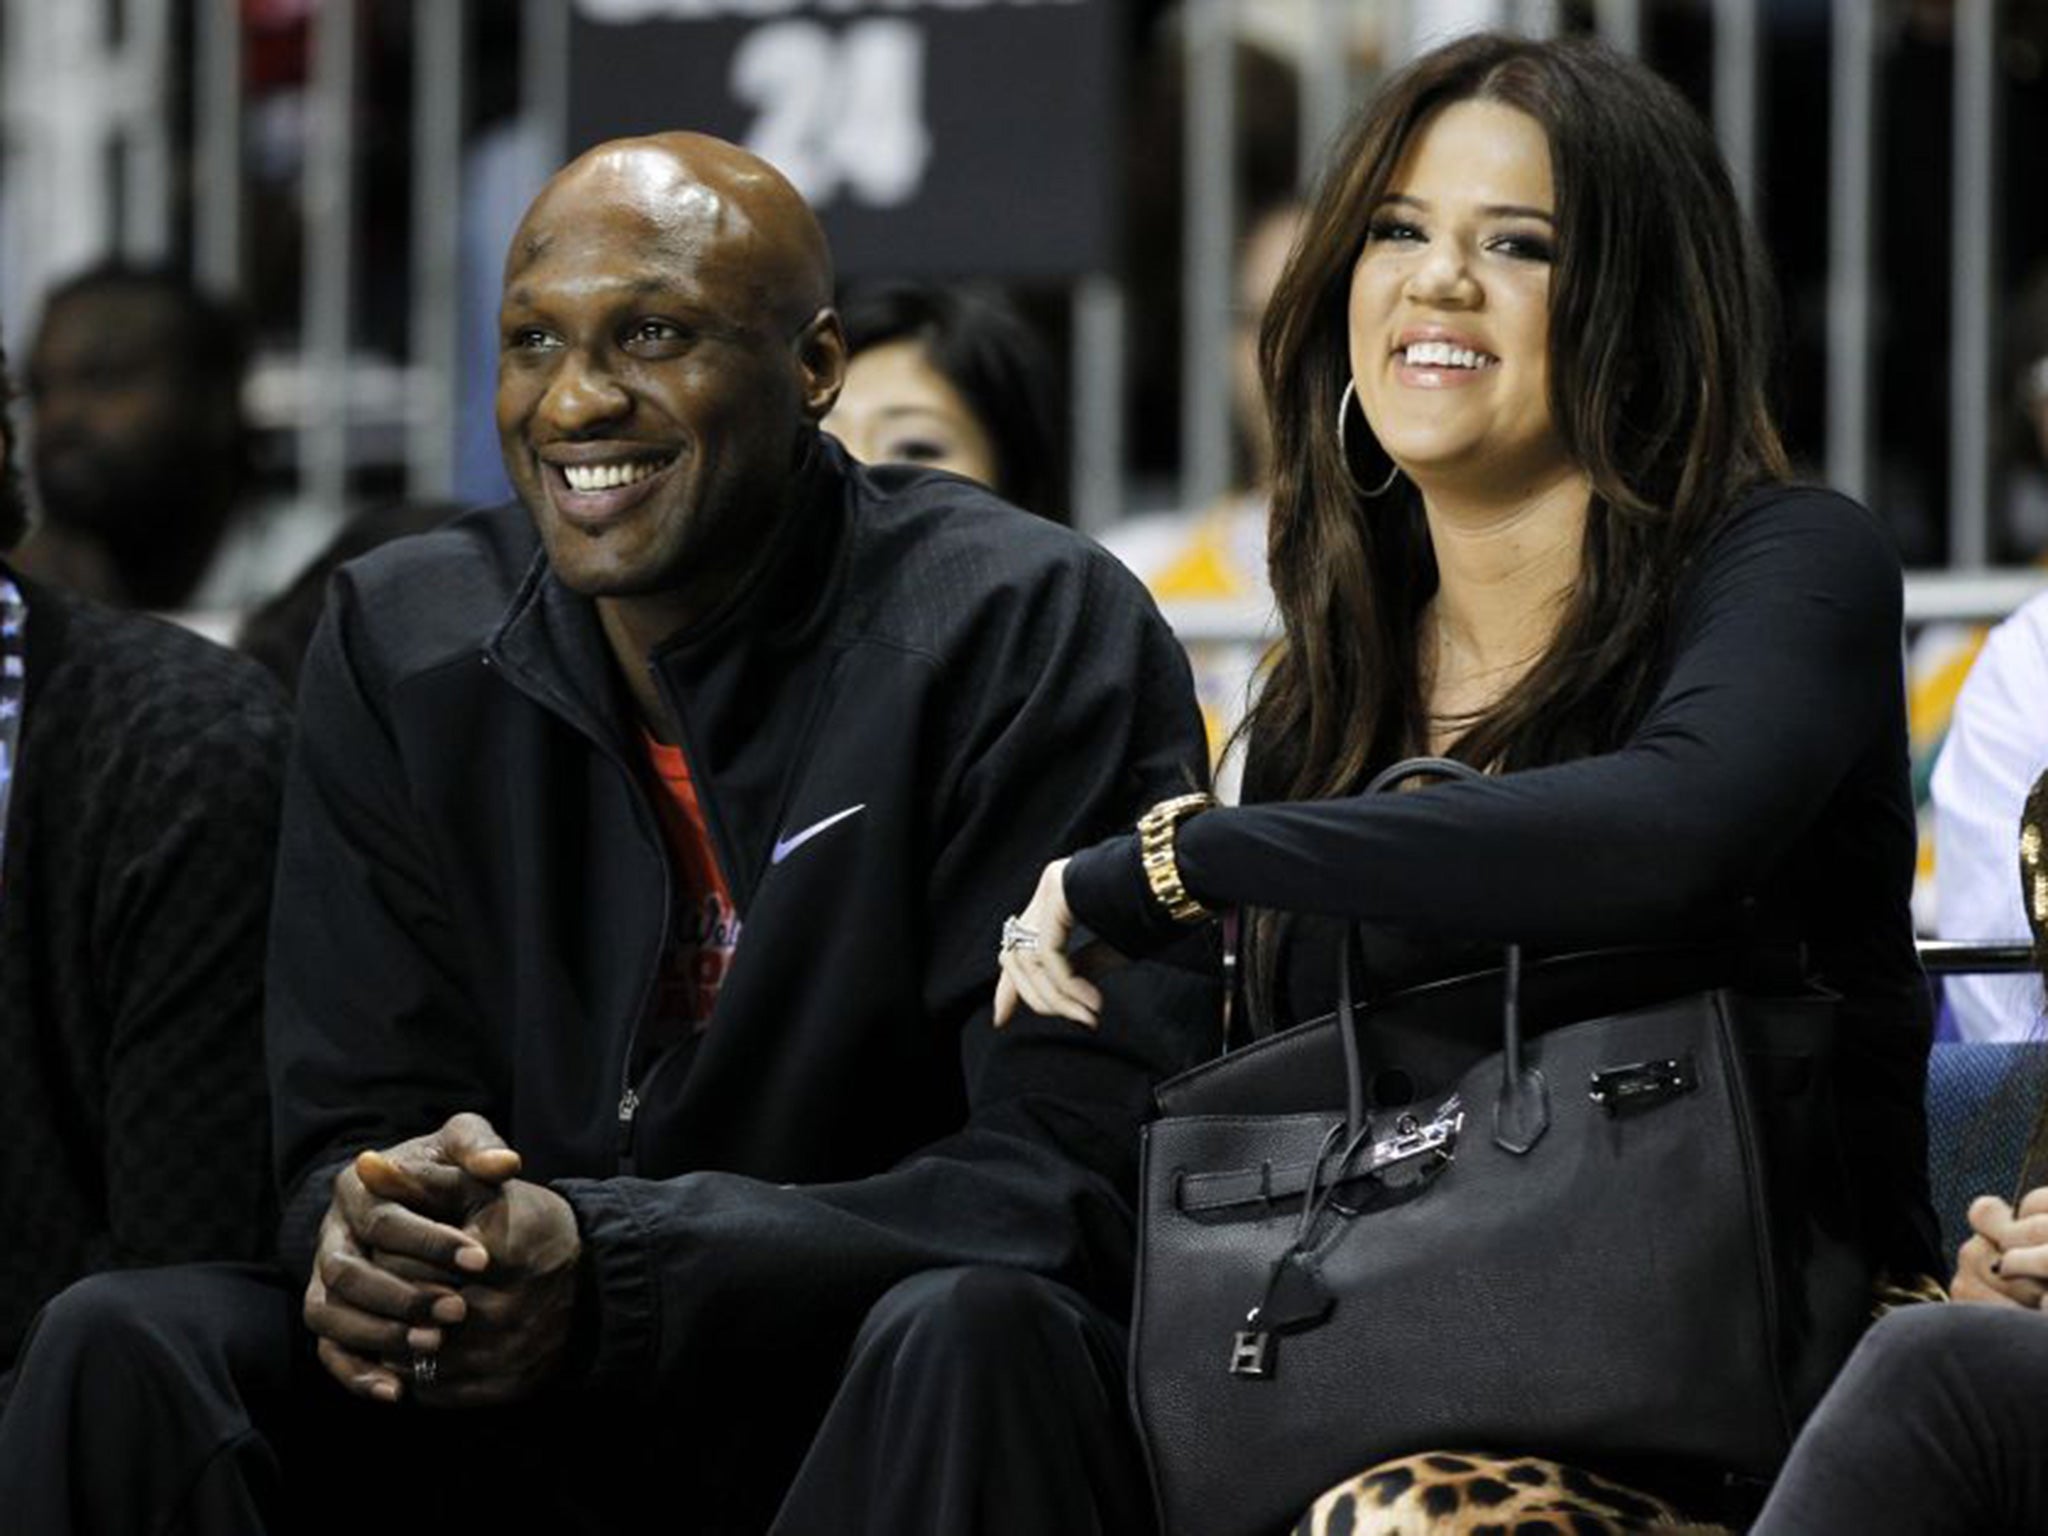 Lamar Odom The basketball star who is fighting for his life The Independent The Independent picture